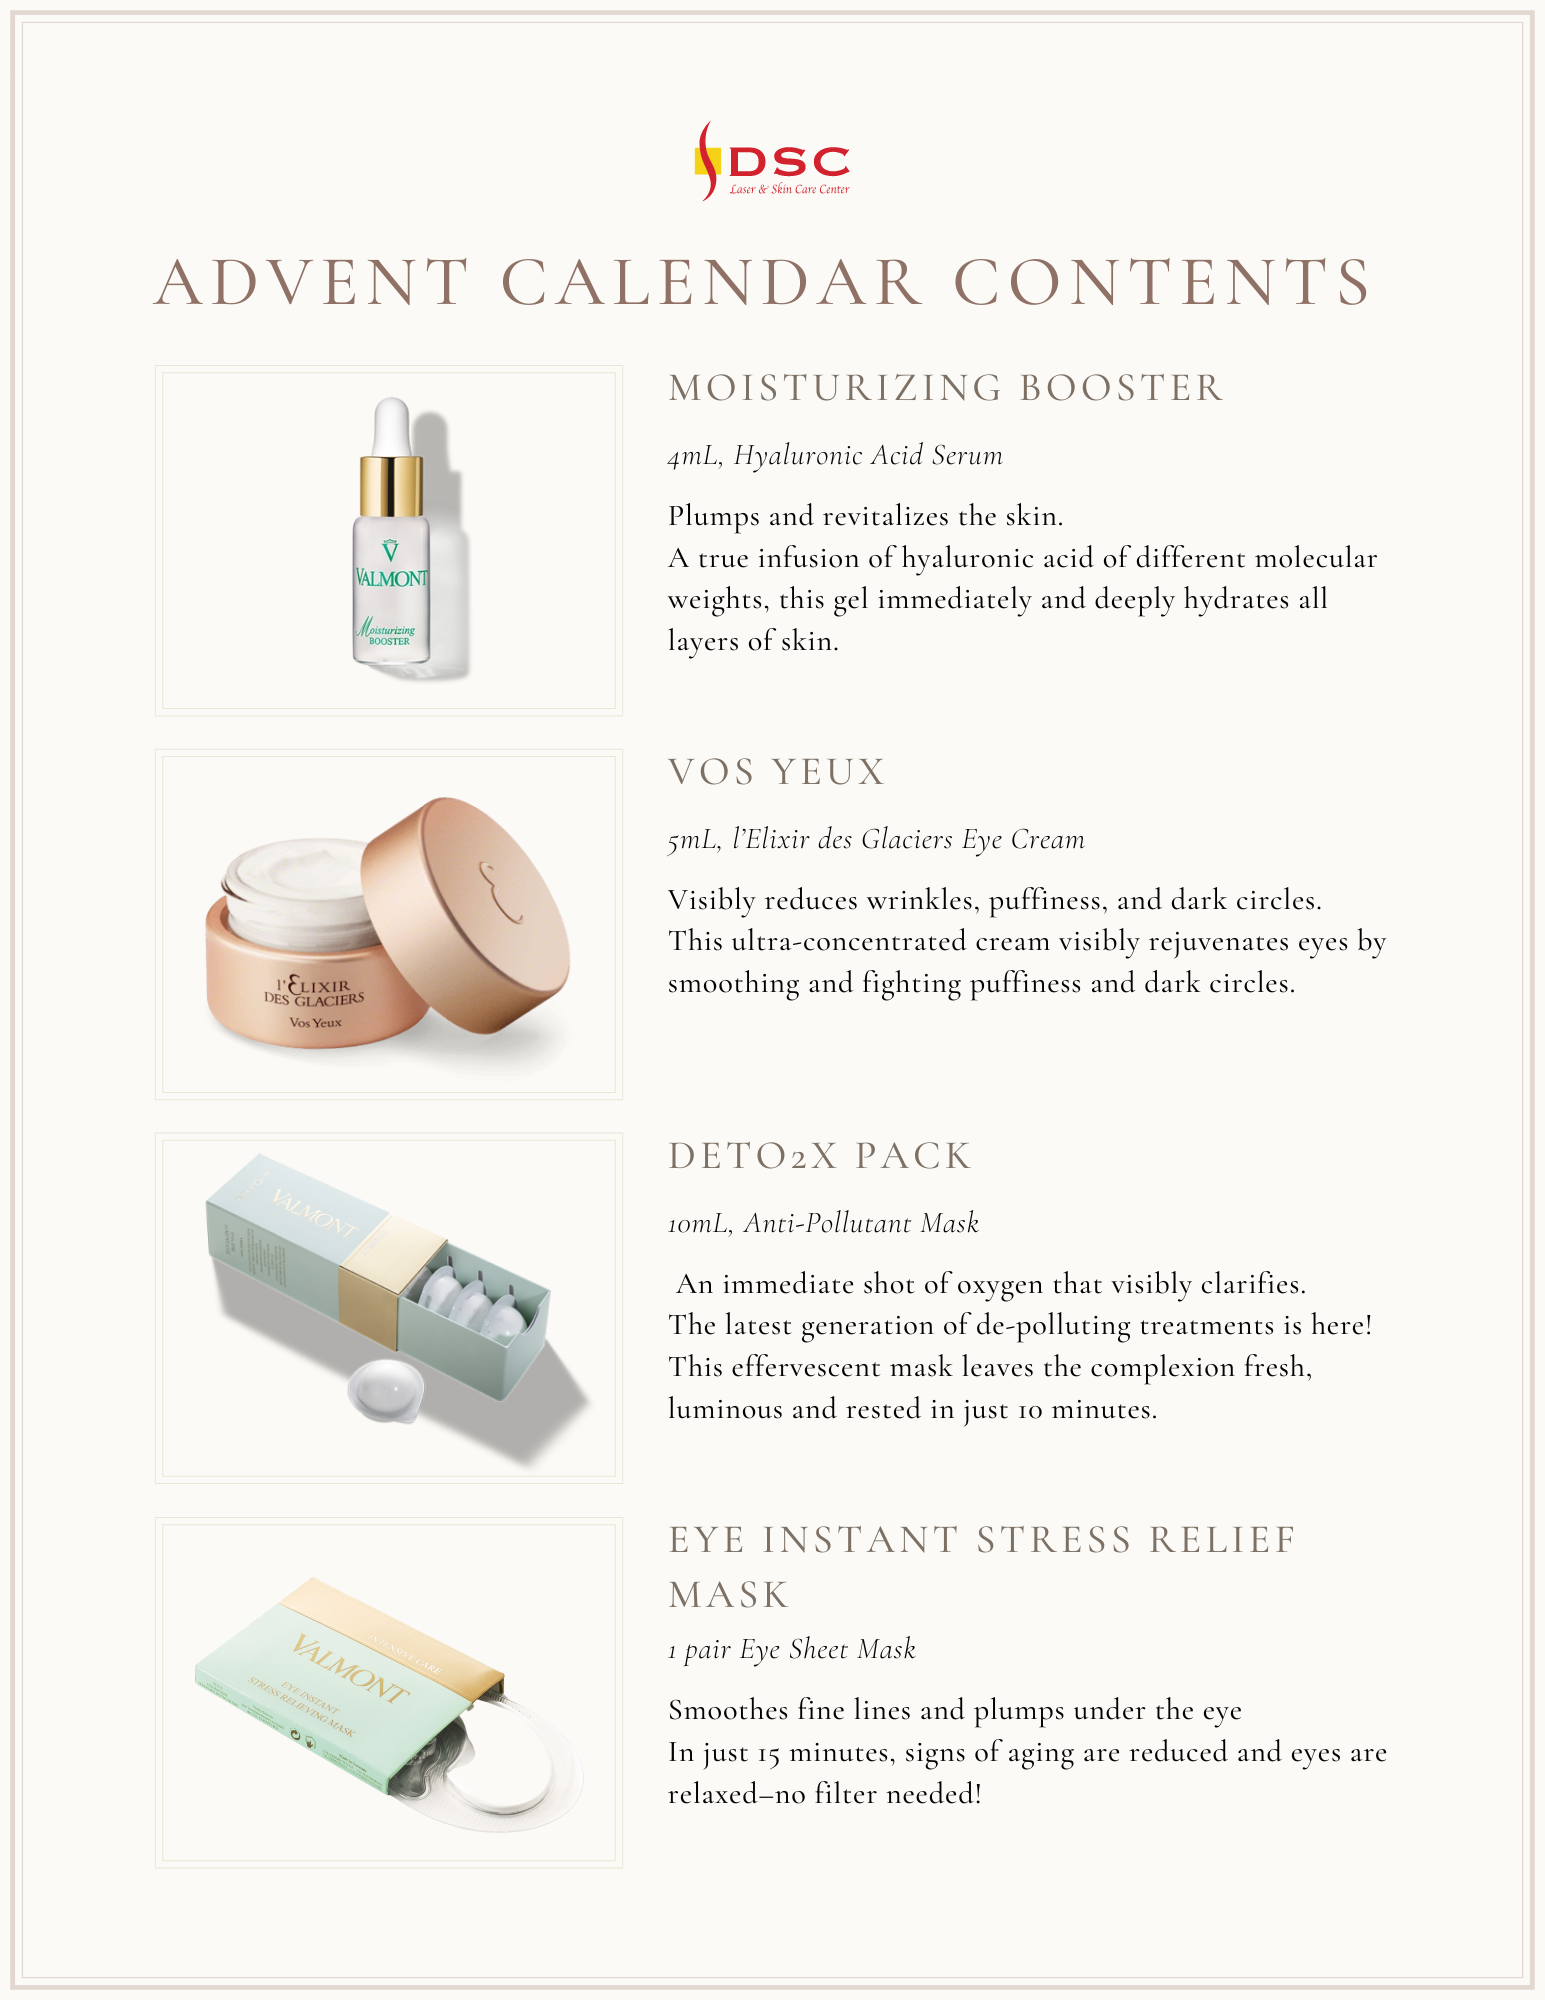 Valmont Cosmetics 2022 Advent Calendar Contents Page 3 of 3 with Valmont Moisturizing Booster, Vos Yeux, Deto2x Pack, and Eye Instant Stress Relief Mask